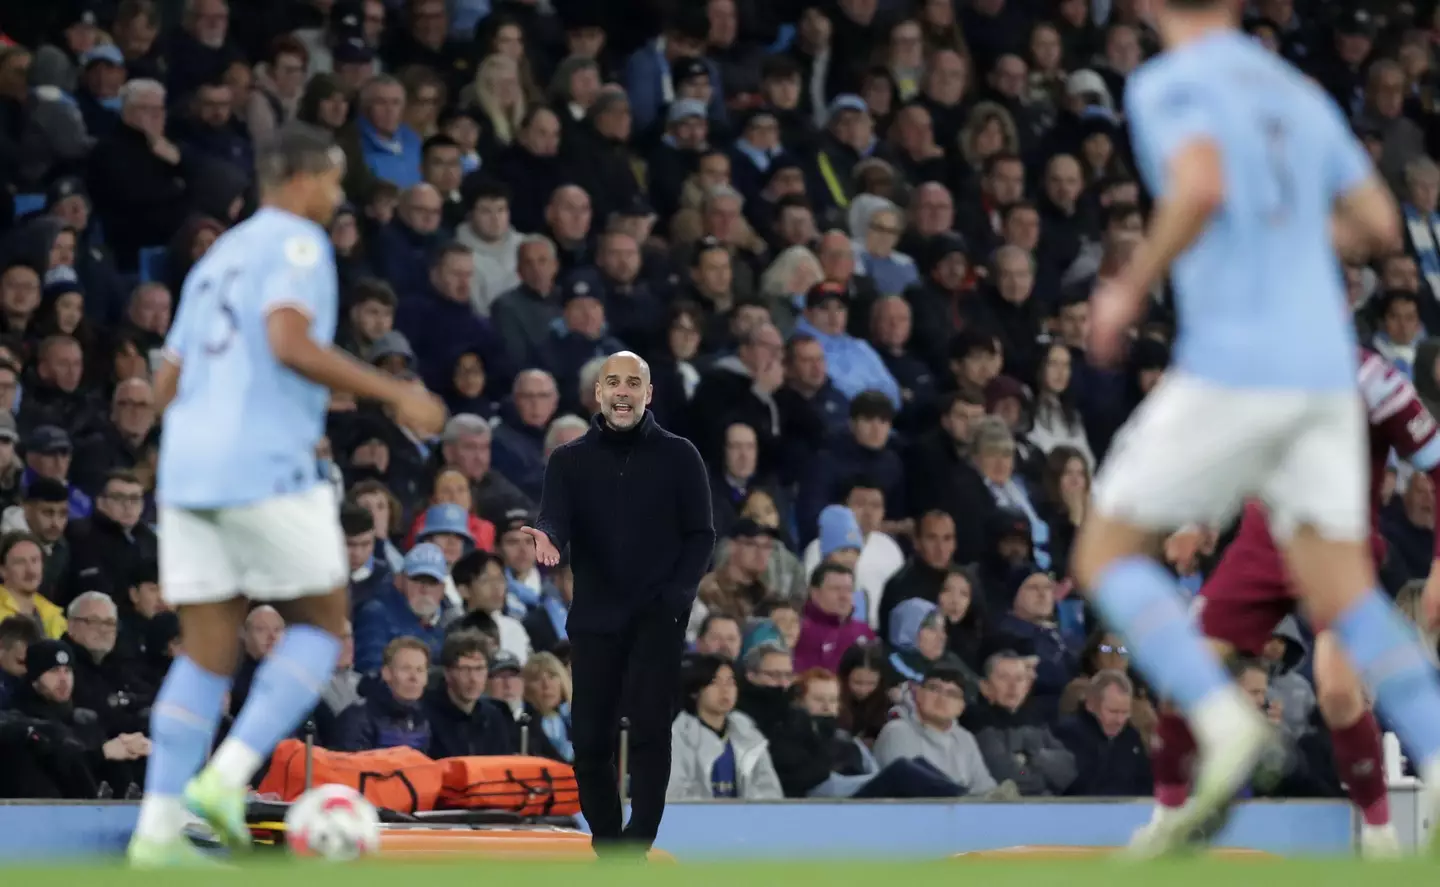 Pep Guardiola on the touchline during Manchester City vs. West Ham United. Image: Alamy